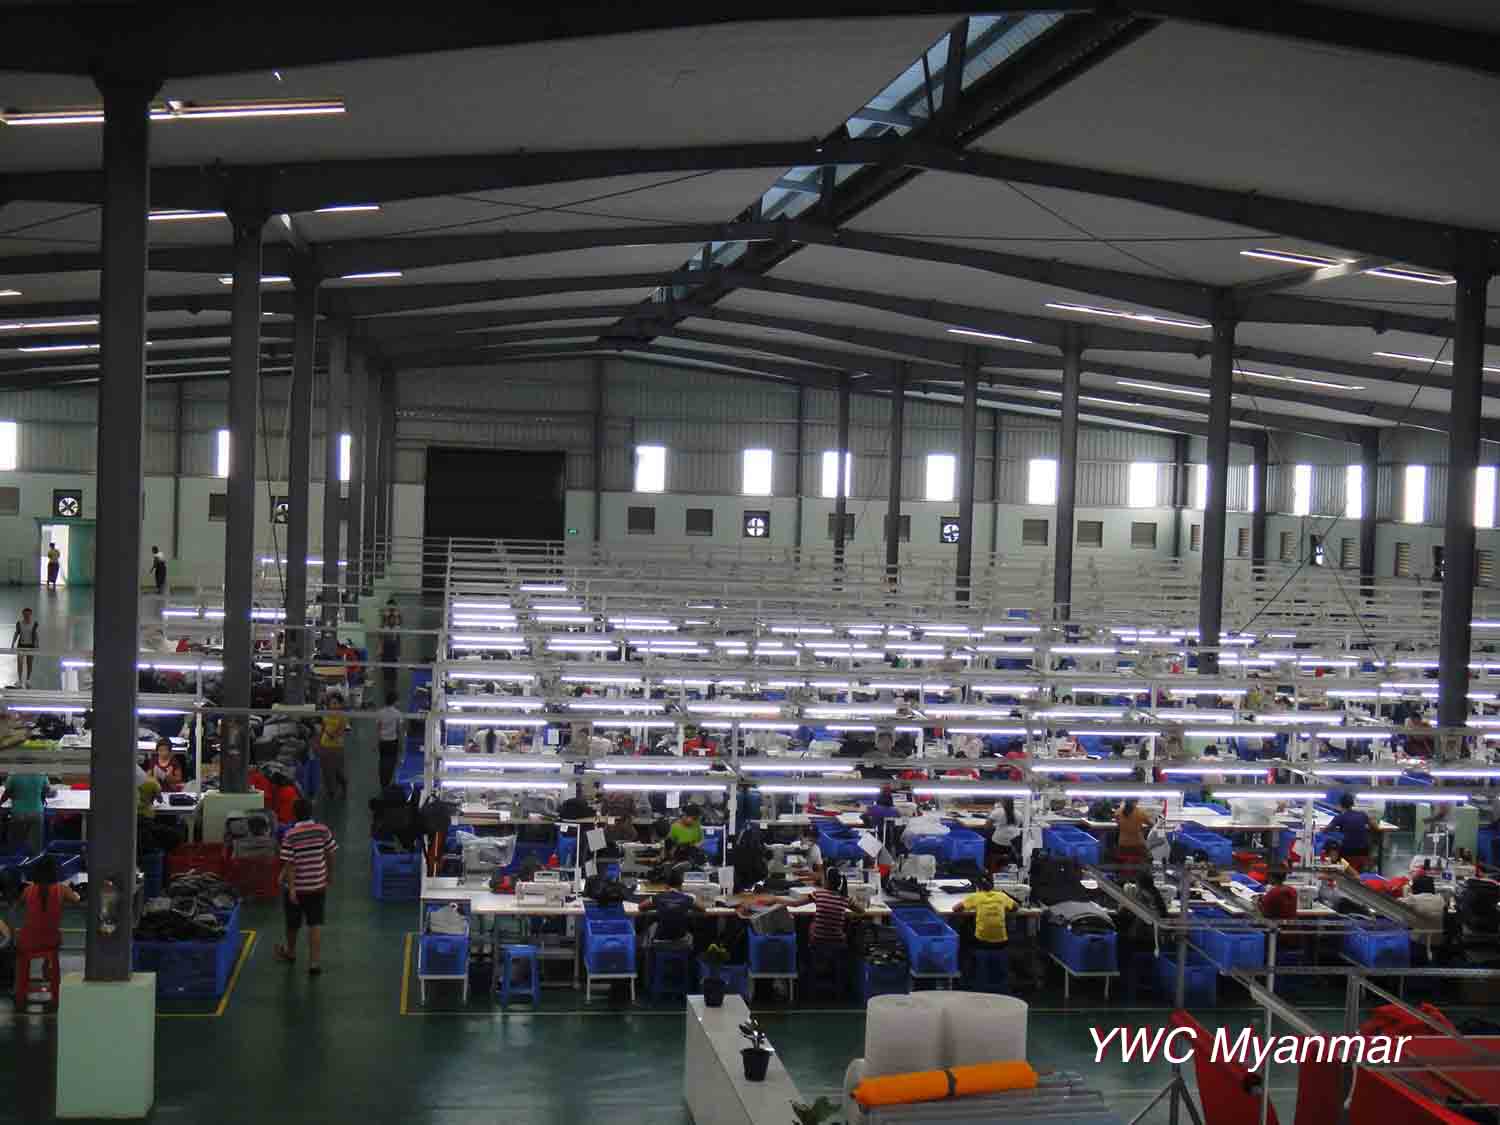 8 Myanmer Factory - Production Floor (2015-06-04)